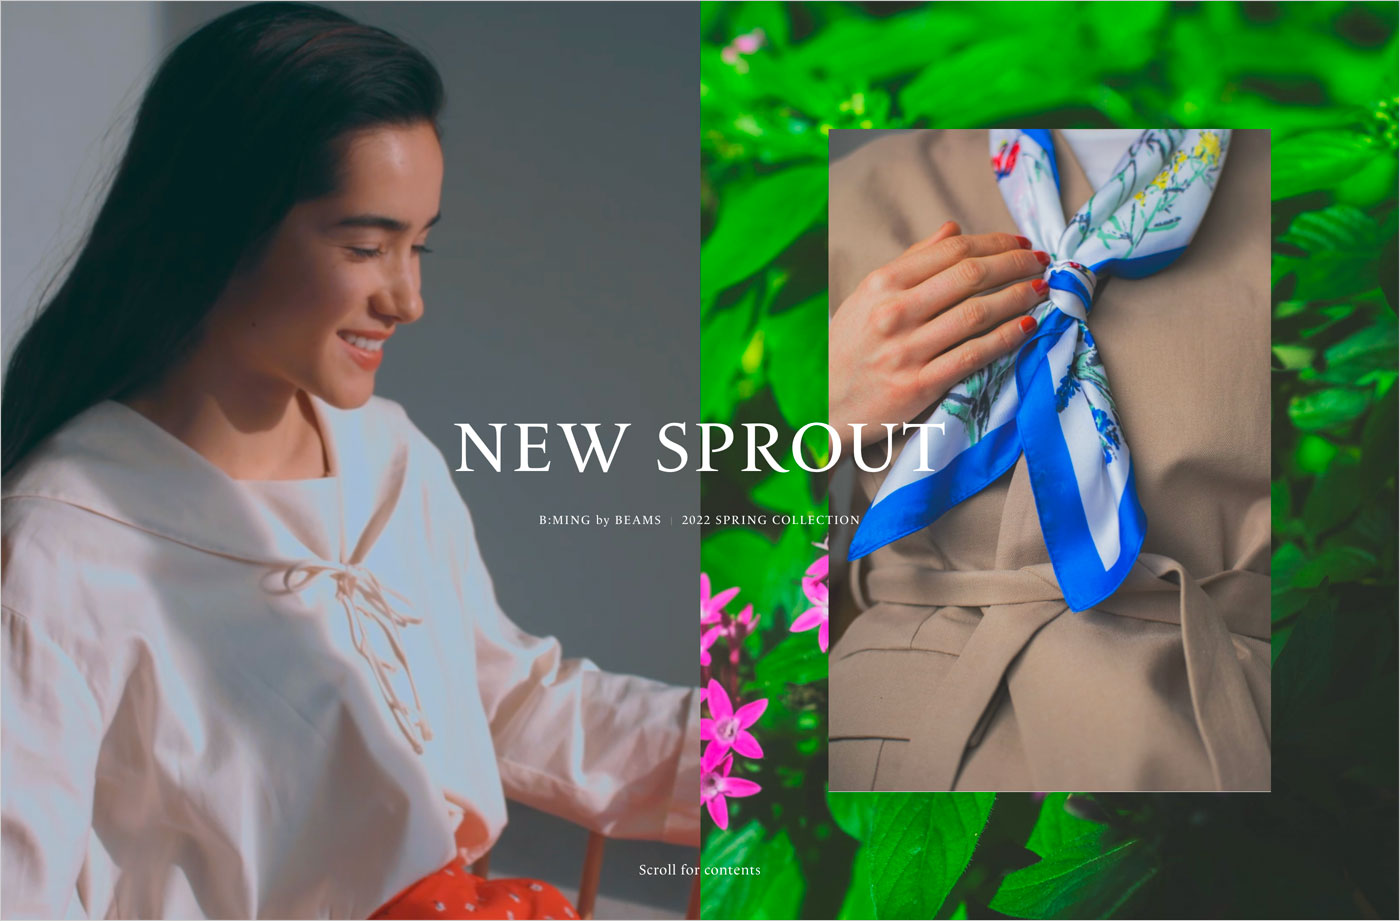 NEW SPROUT｜B:MING by BEAMS SPRING&SUMMER 2022ウェブサイトの画面キャプチャ画像